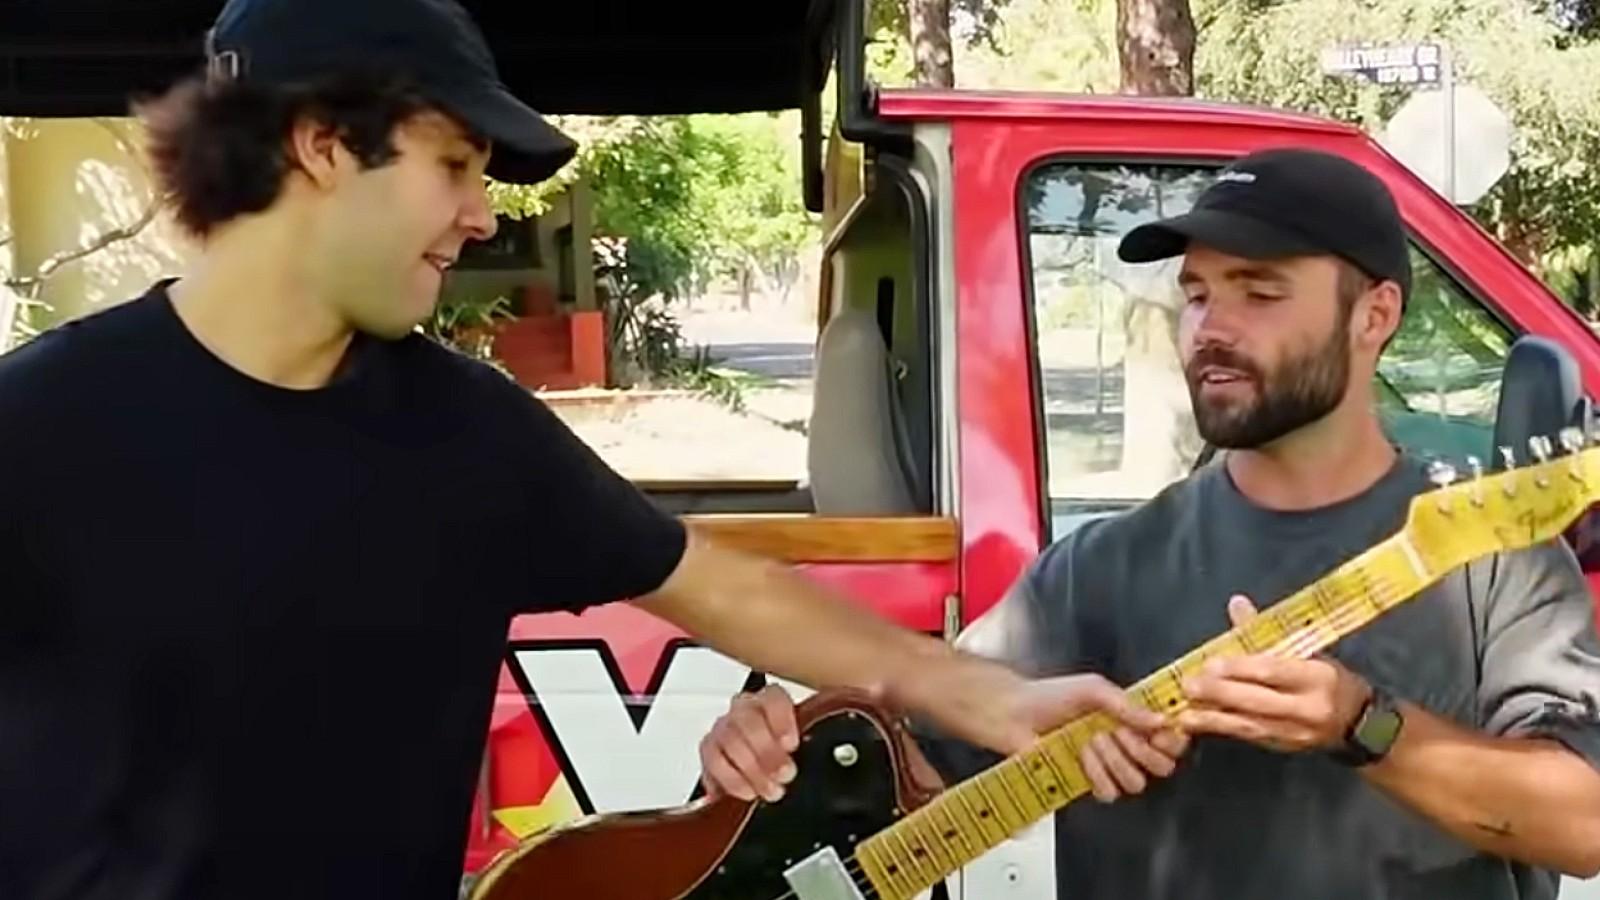 David Dobrik trades car for guitar with swapping YouTuber